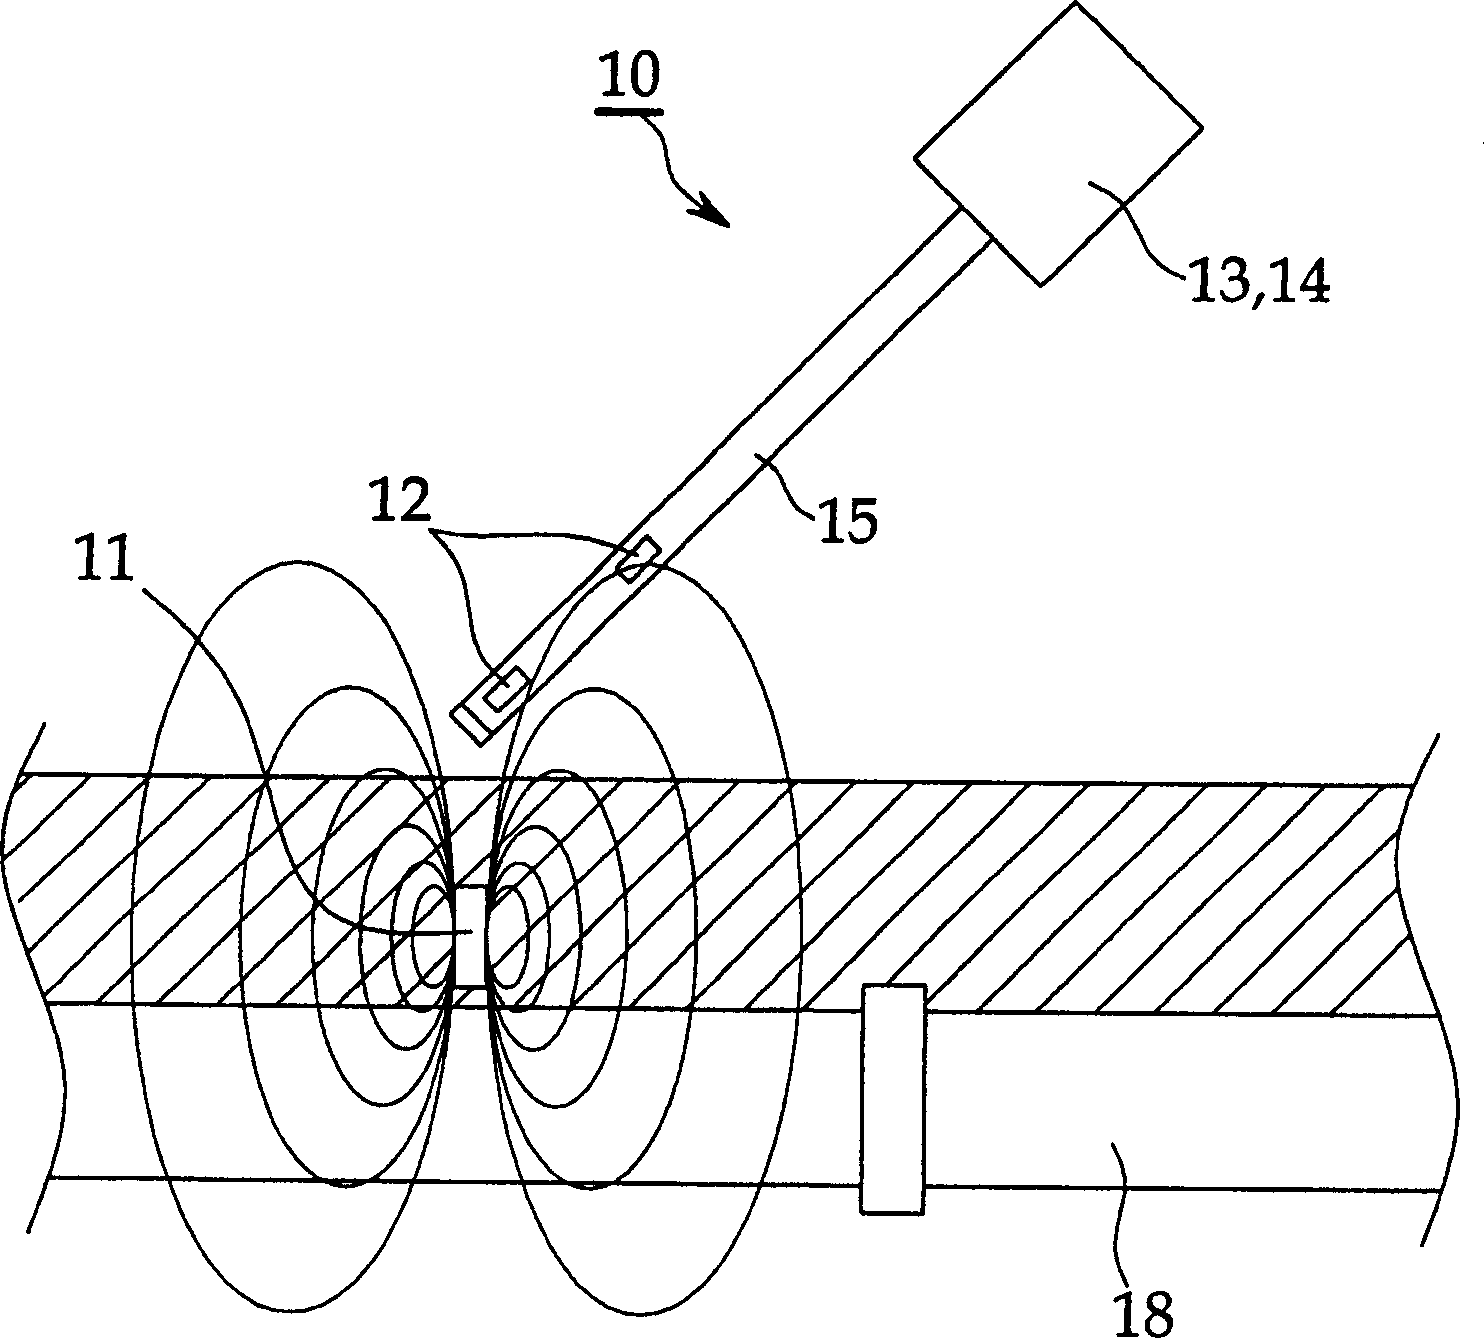 Magnetic mark detector for detecting location of buried objects utilizing magnetic mark